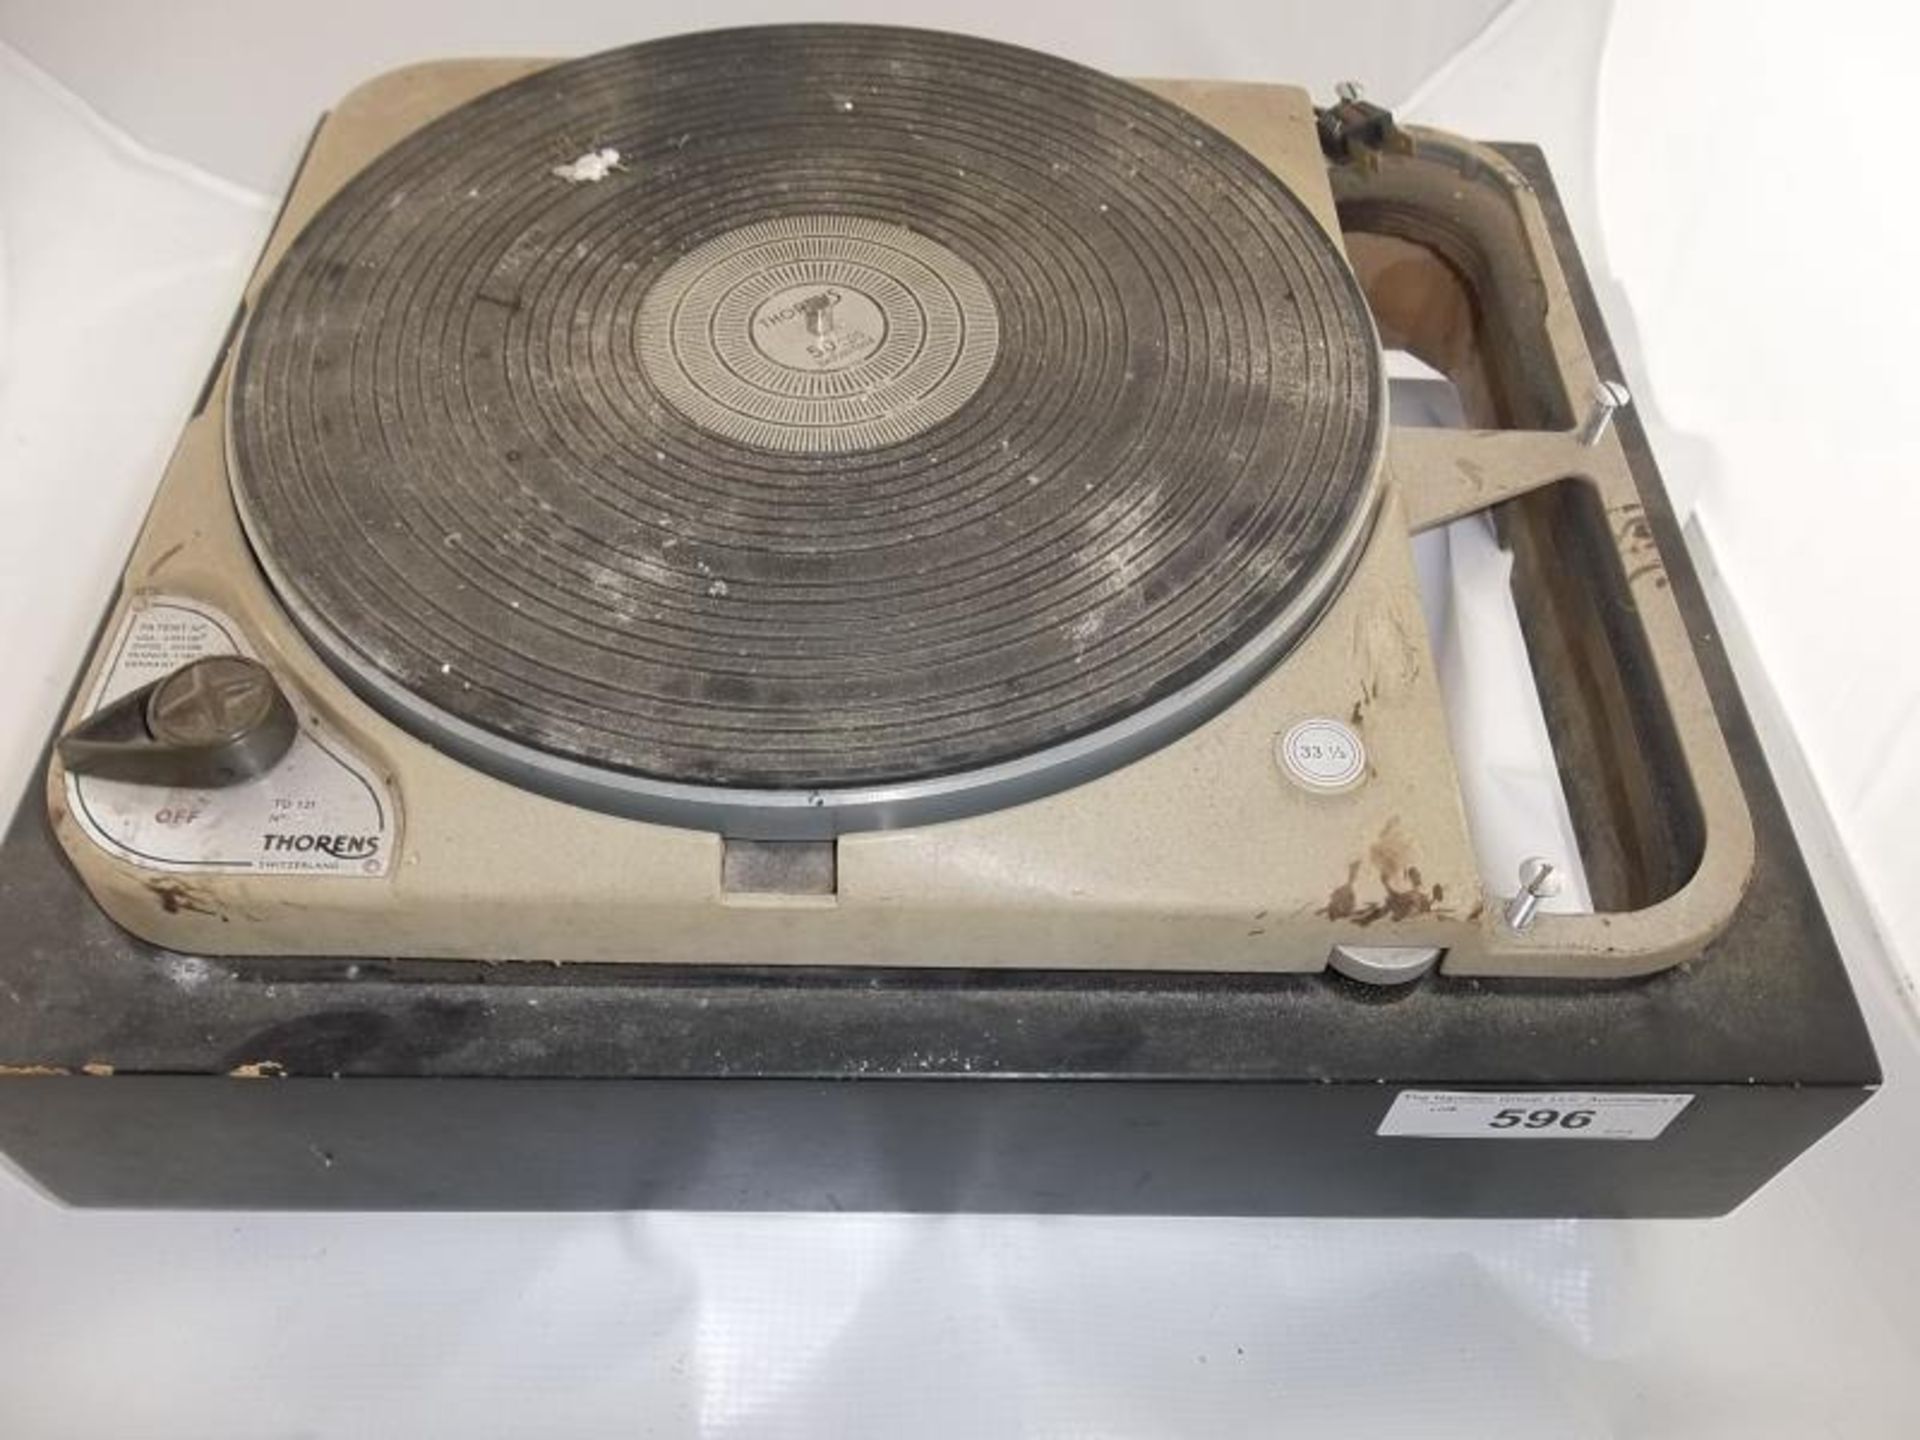 Thorens TD 121 turntable, #2571, made in Switzerland, 33 1/3, no arm board or arm